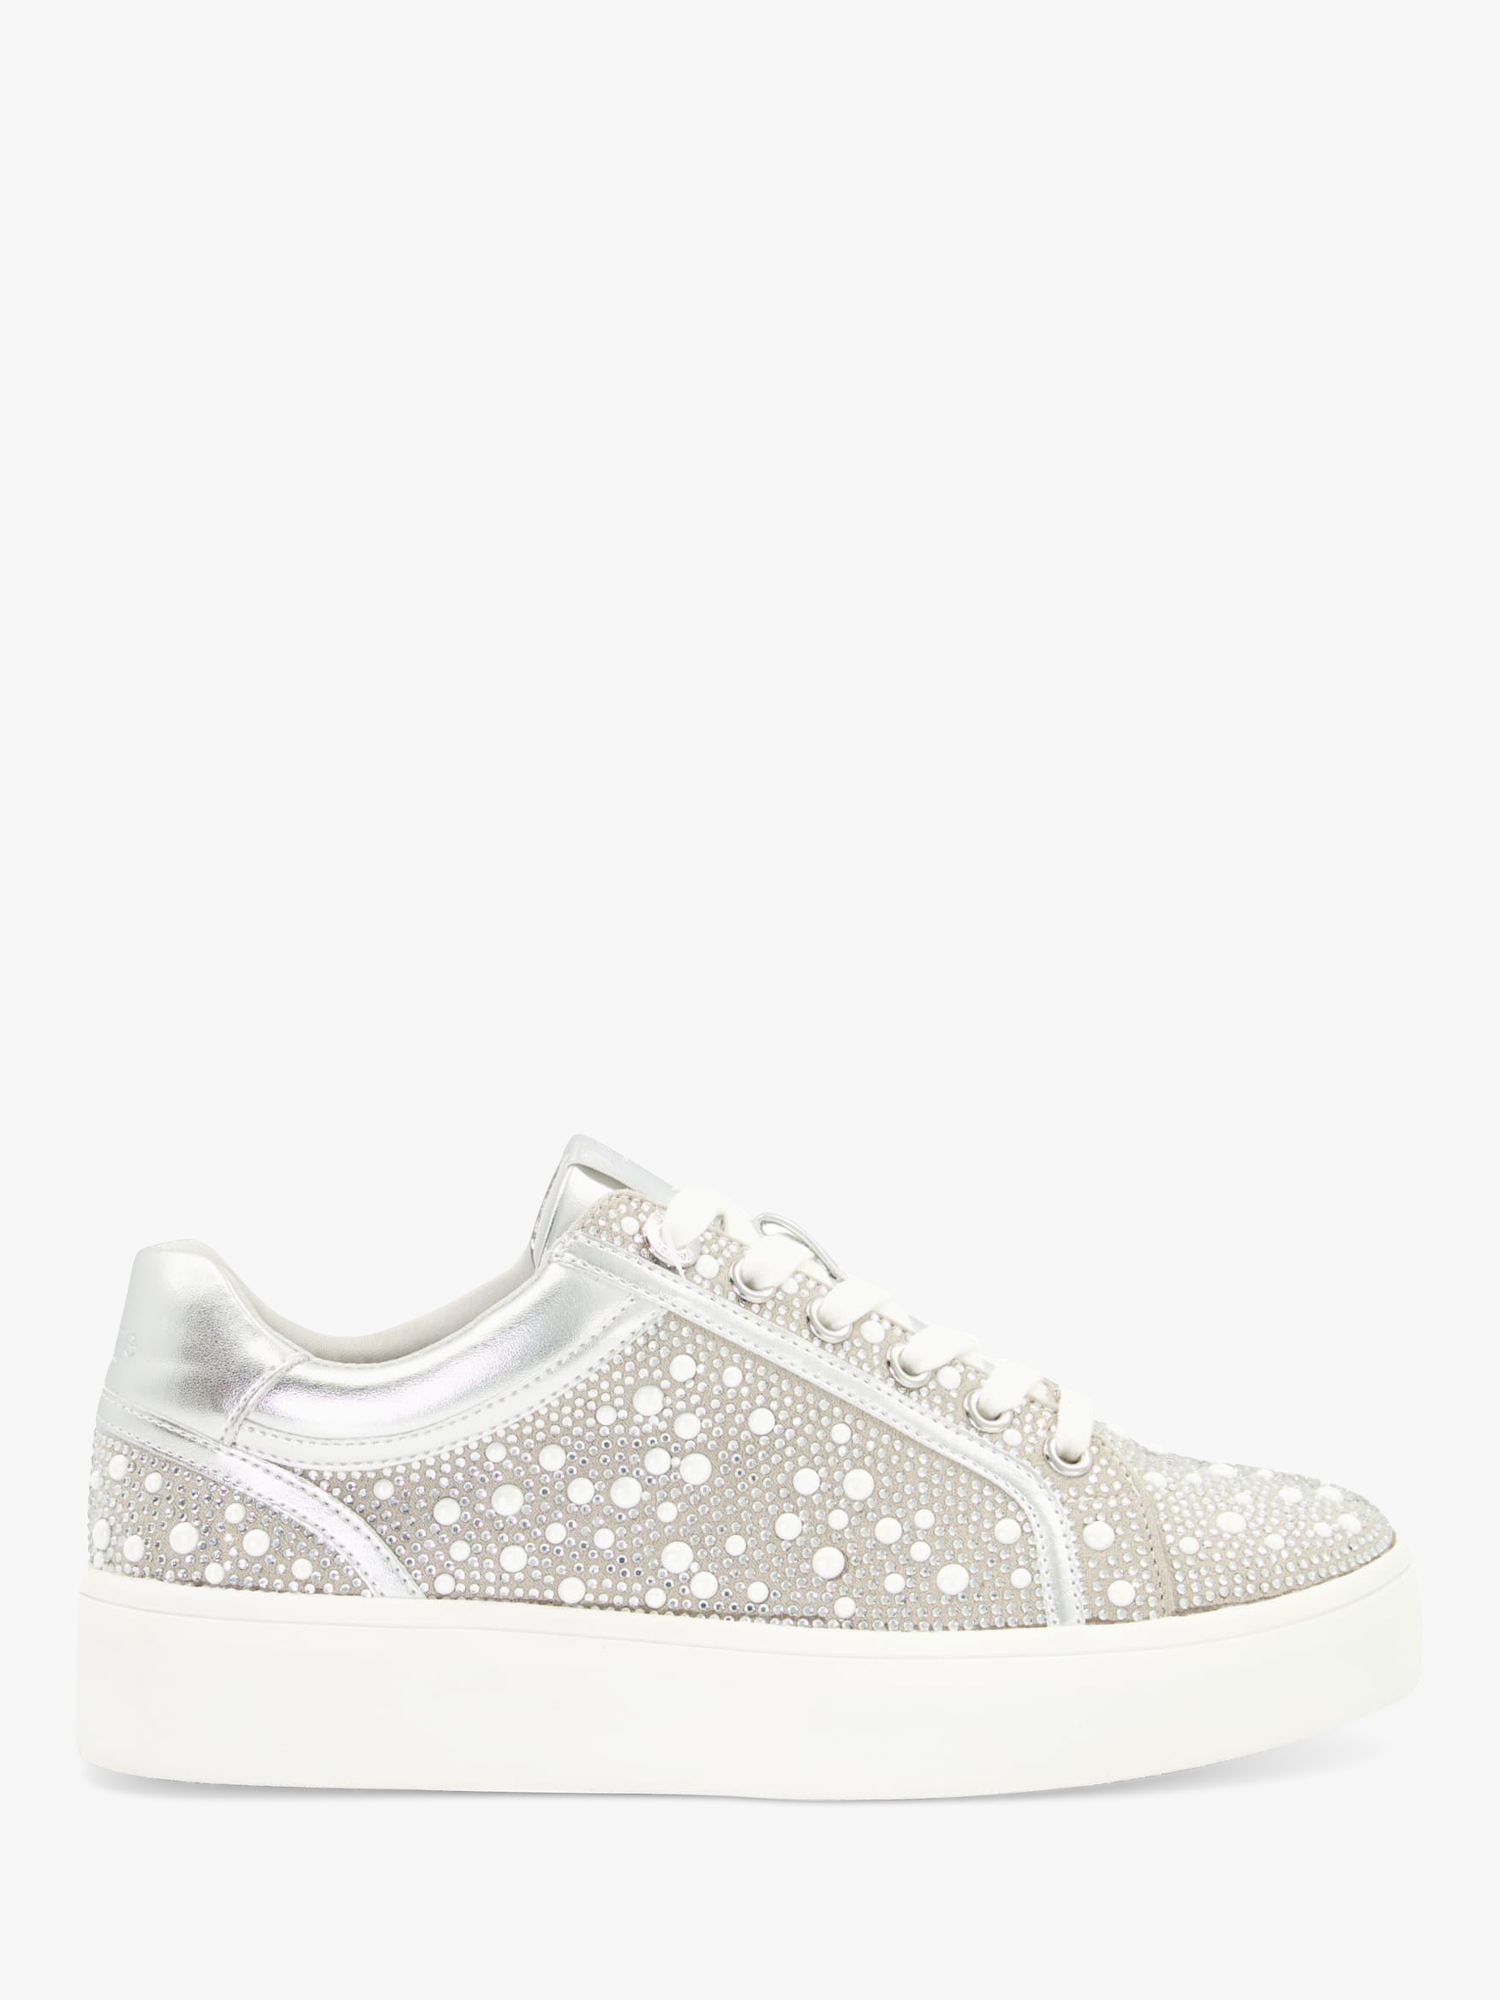 Dune Everleas Embellished Chunky Trainers, Silver